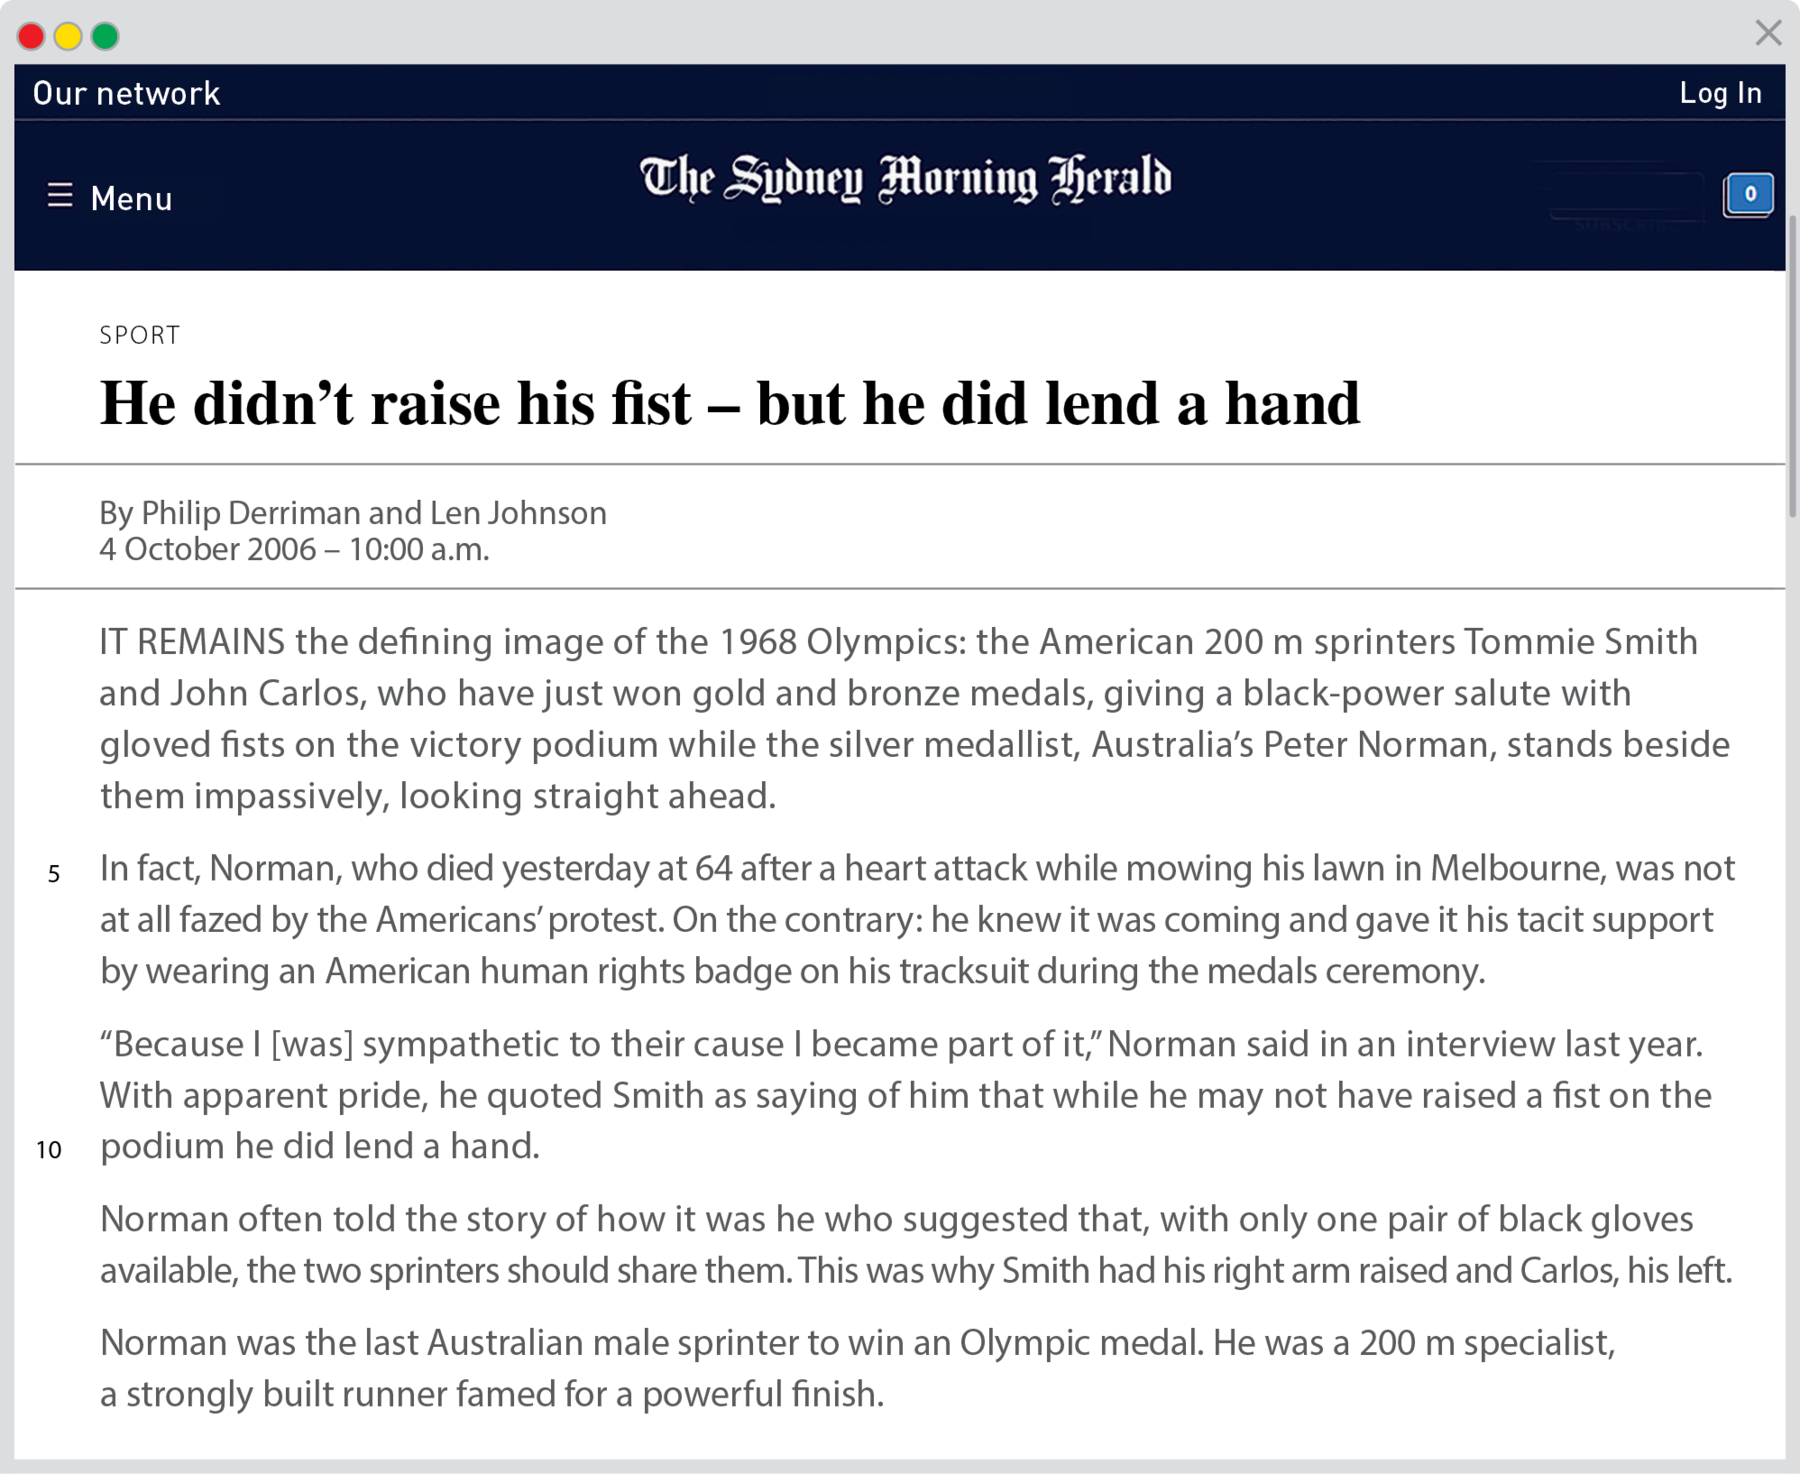 Reprodução de página da internet. Na parte superior, fundo em azul-escuro e título:  The Sydney Morning Herald. Texto: SPORT Título He didn’t raise his fist – but he did lend a hand By Philip Derriman and Len Johnson 4 October 2006 – 10:00 a.m. IT REMAINS the defining image of the 1968 Olympics: the American 200 m sprinters Tommie Smith and John Carlos, who have just won gold and bronze medals, giving a black-power salute with gloved fists on the victory podium while the silver medallist, Australia’s Peter Norman, stands beside them impassively, looking straight ahead. Linha 5 In fact, Norman, who died yesterday at 64 after a heart attack while mowing his lawn in Melbourne, was not at all fazed by the Americans’ protest. On the contrary: he knew it was coming and gave it his tacit supp ort by wearing an American human rights badge on his tracksuit during the medals ceremony. “Because I [was] sympathetic to their cause I became part of it,” Norman said in an interview last year. With apparent pride, he quoted Smith as saying of him that while he may not have raised a fist on the Linha 10 podium he did lend a hand. Norman often told the story of how it was he who suggested that, with only one pair of black gloves available, the two sprinters should share them. This was why Smith had his right arm raised and Carlos, his left. Norman was the last Australian male sprinter to win an Olympic medal. He was a 200 m special ist, a strongly built runner famed for a powerful finish.